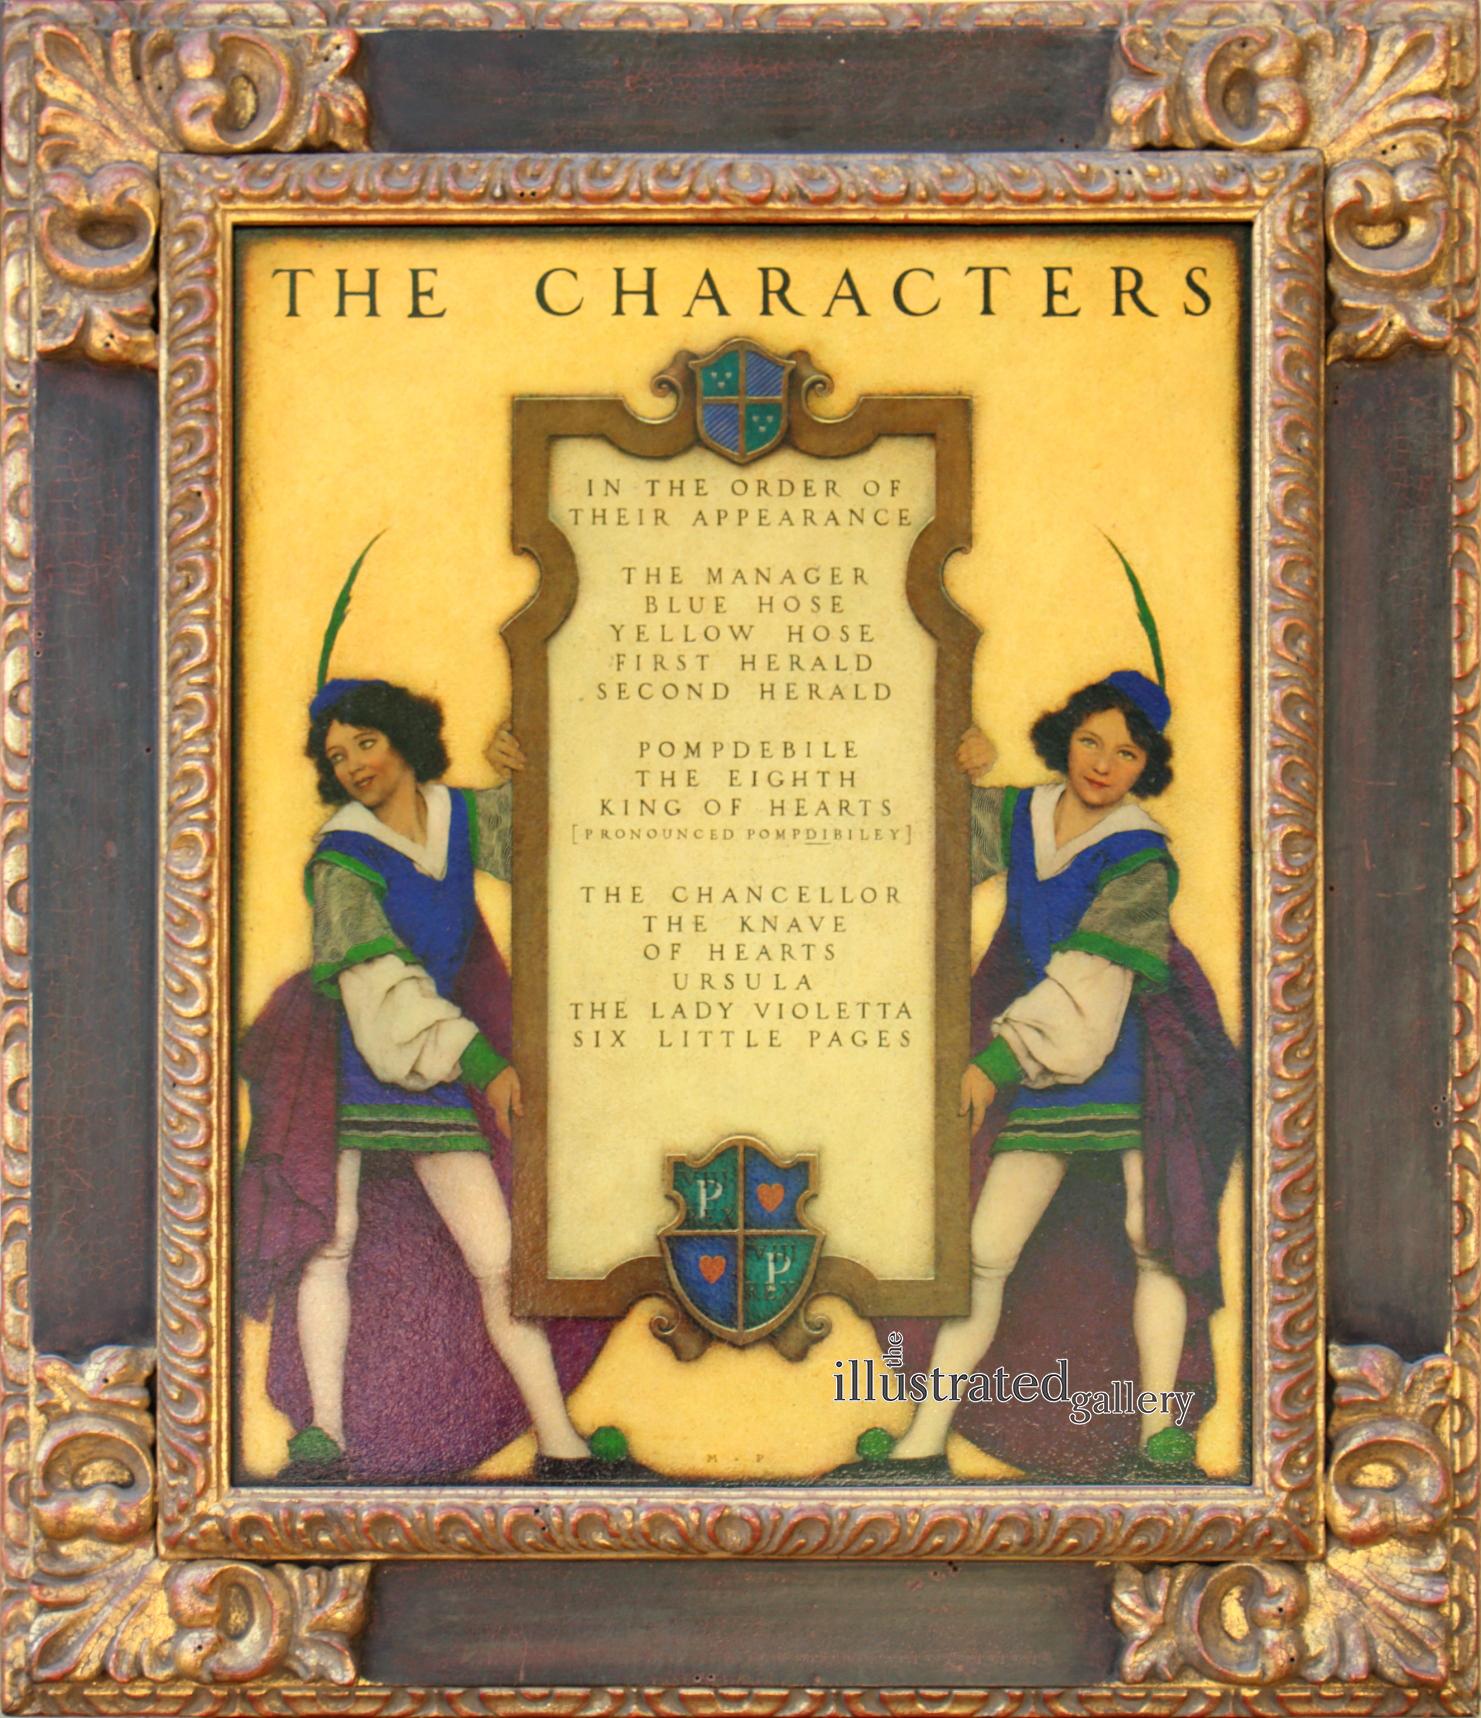 The Knave of Hearts: List of Characters - Painting by Maxfield Parrish